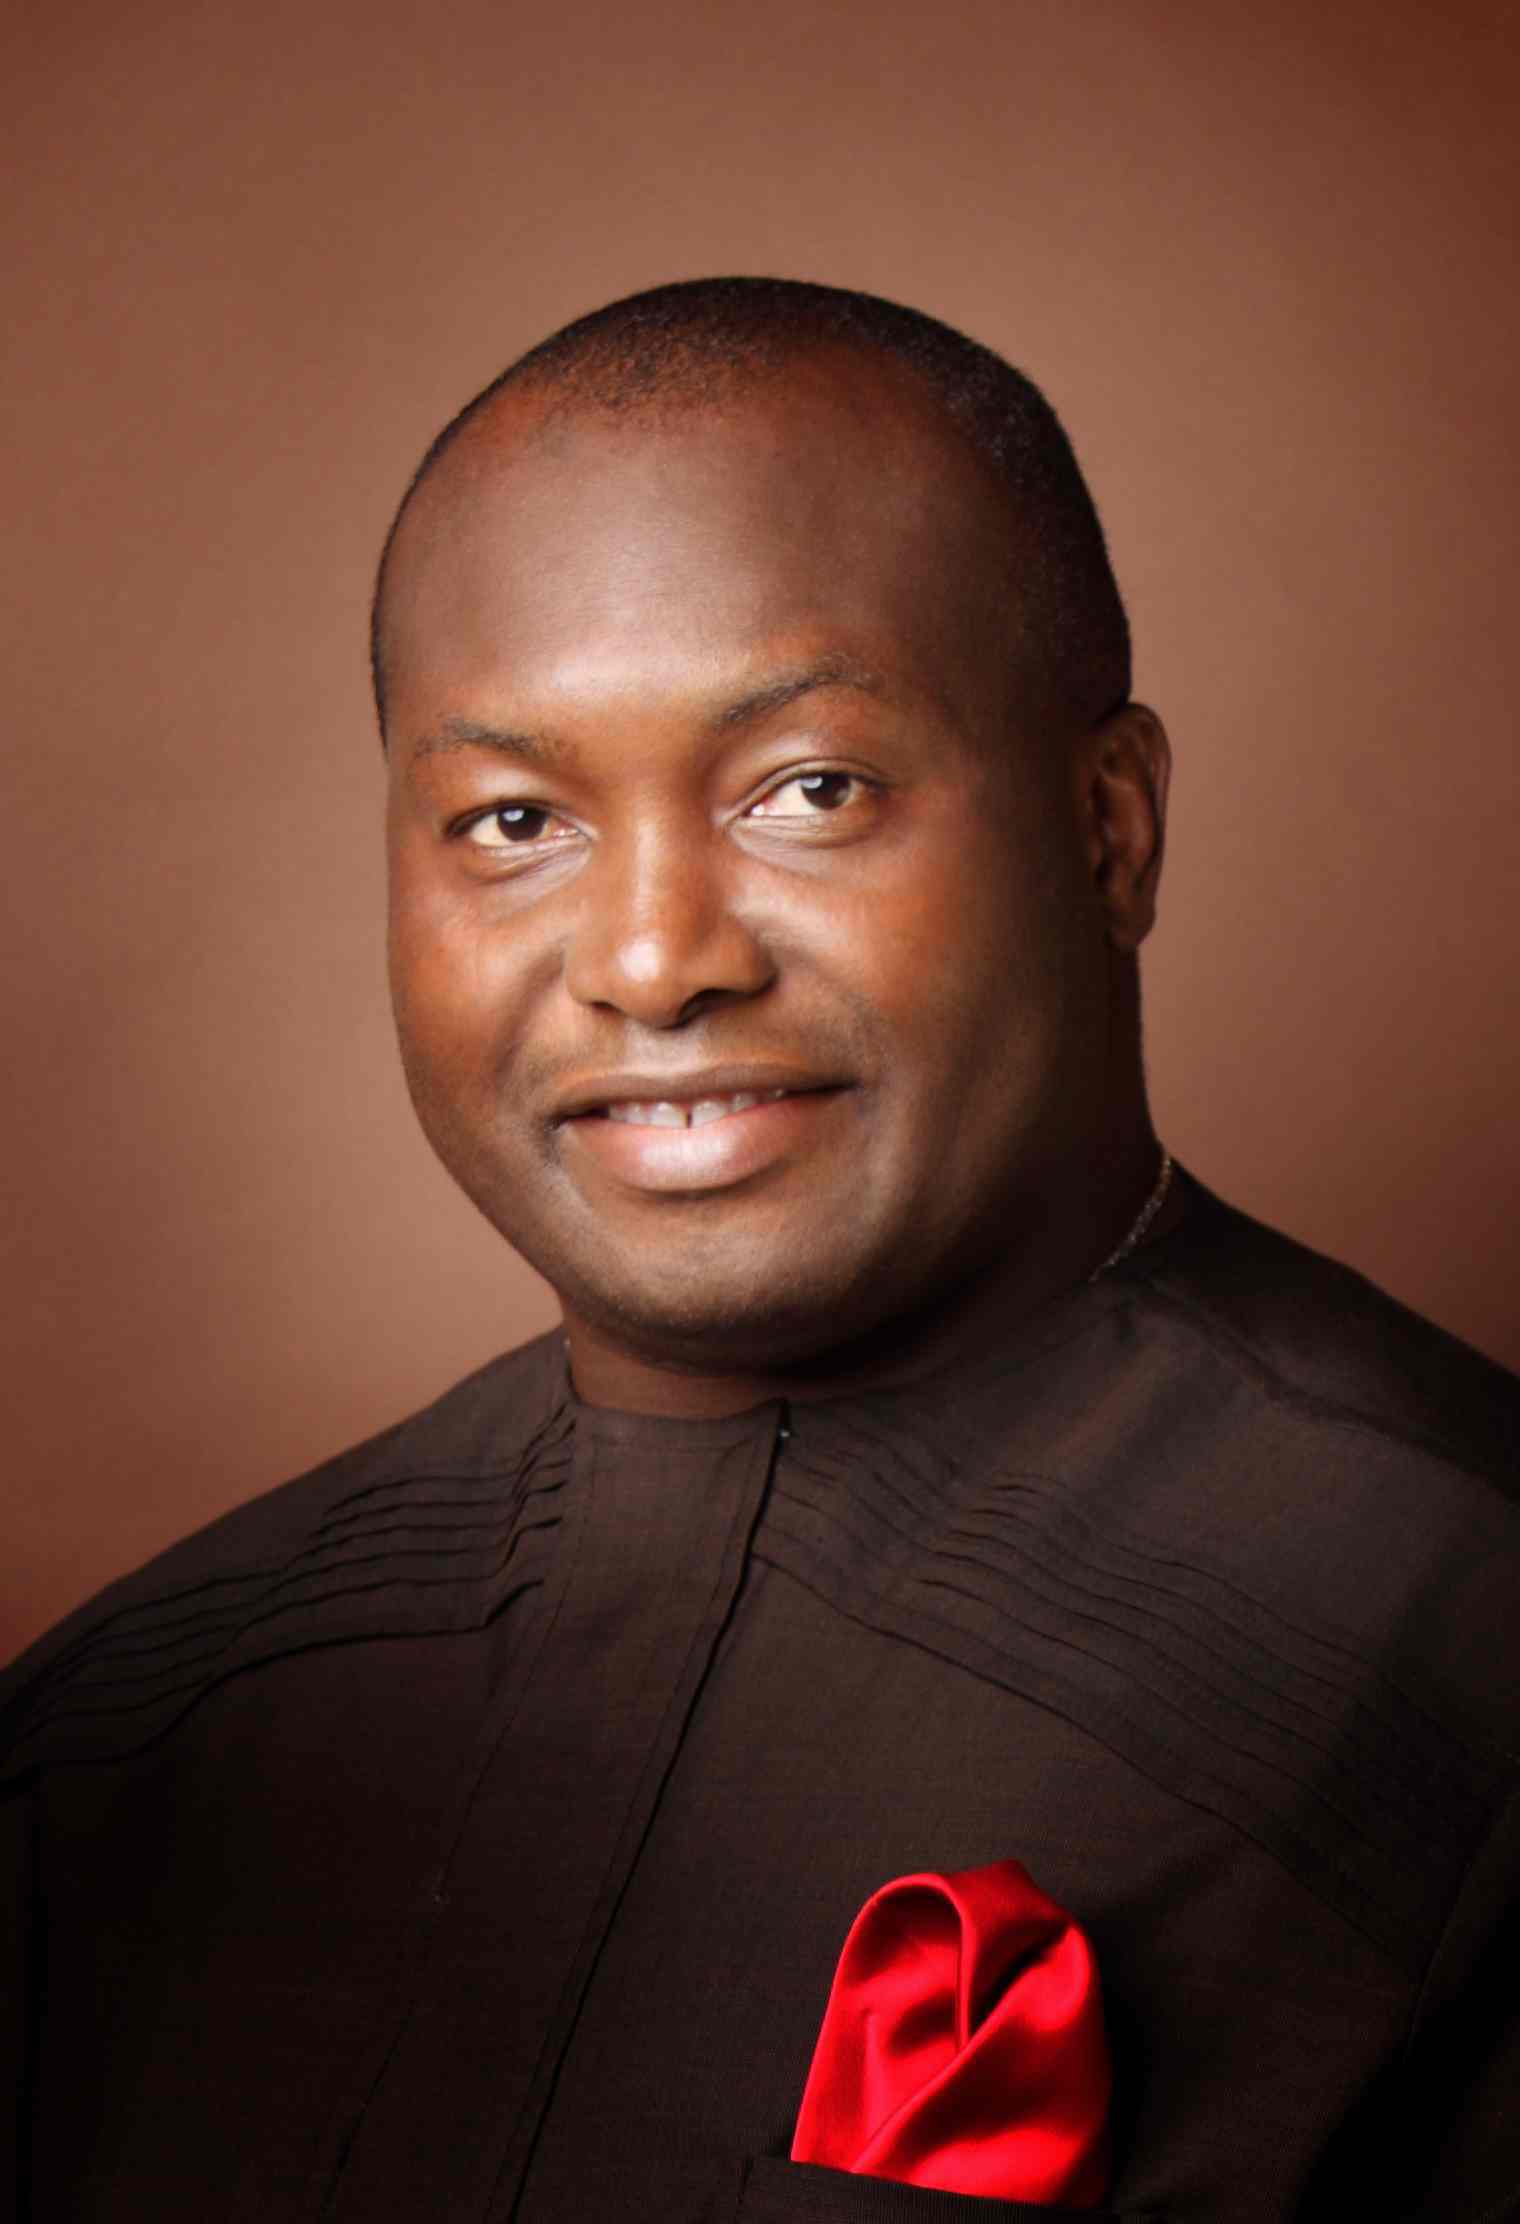 Soonest igbos cry of marginalization will end – Ifeanyi Ubah